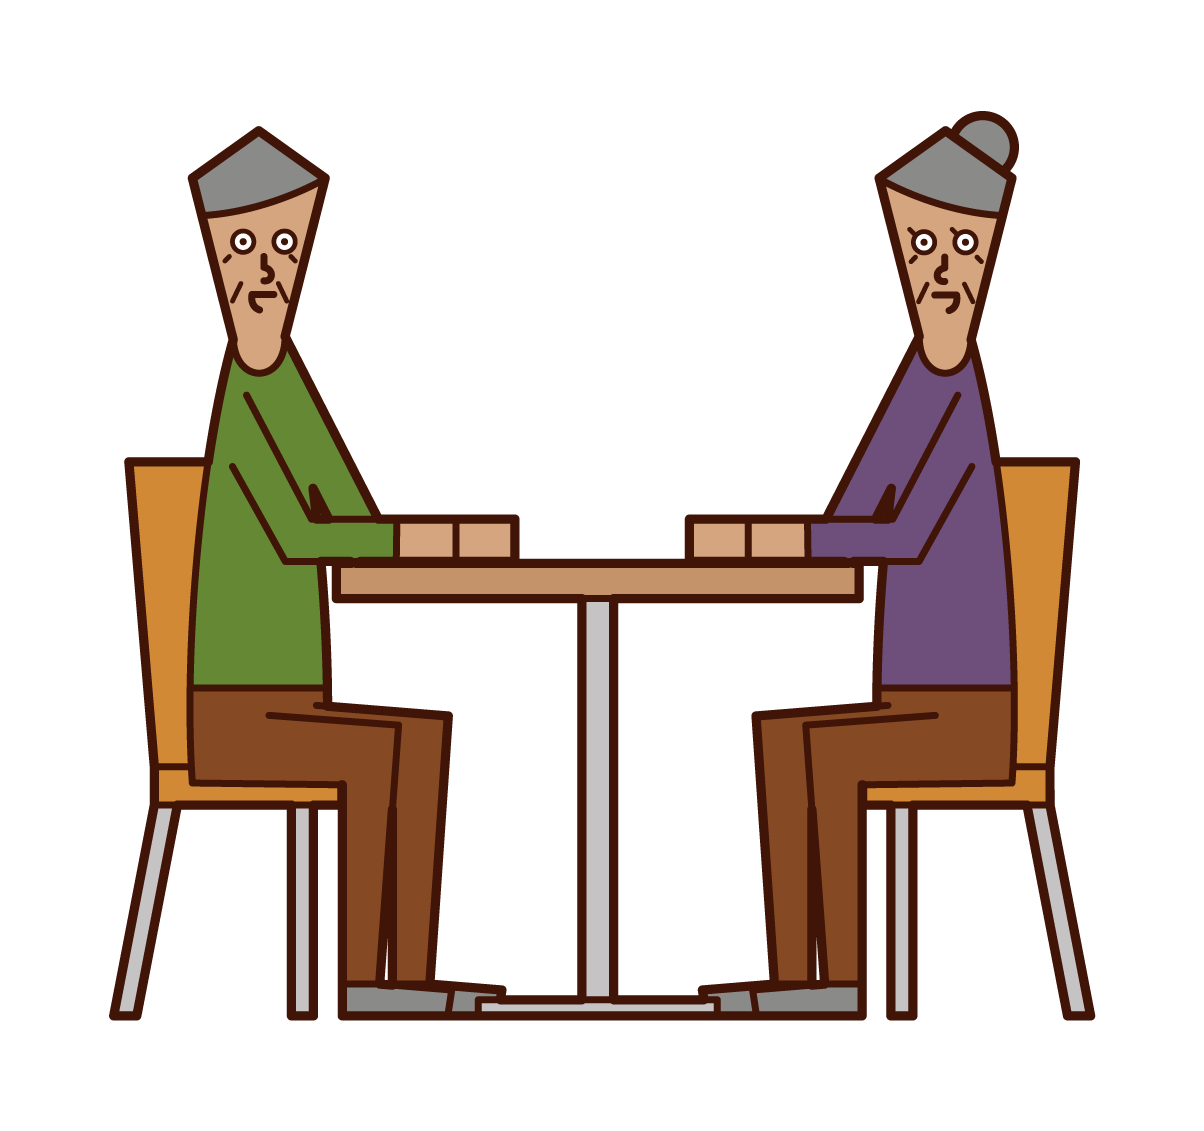 Illustration of an elderly couple sitting down and talking